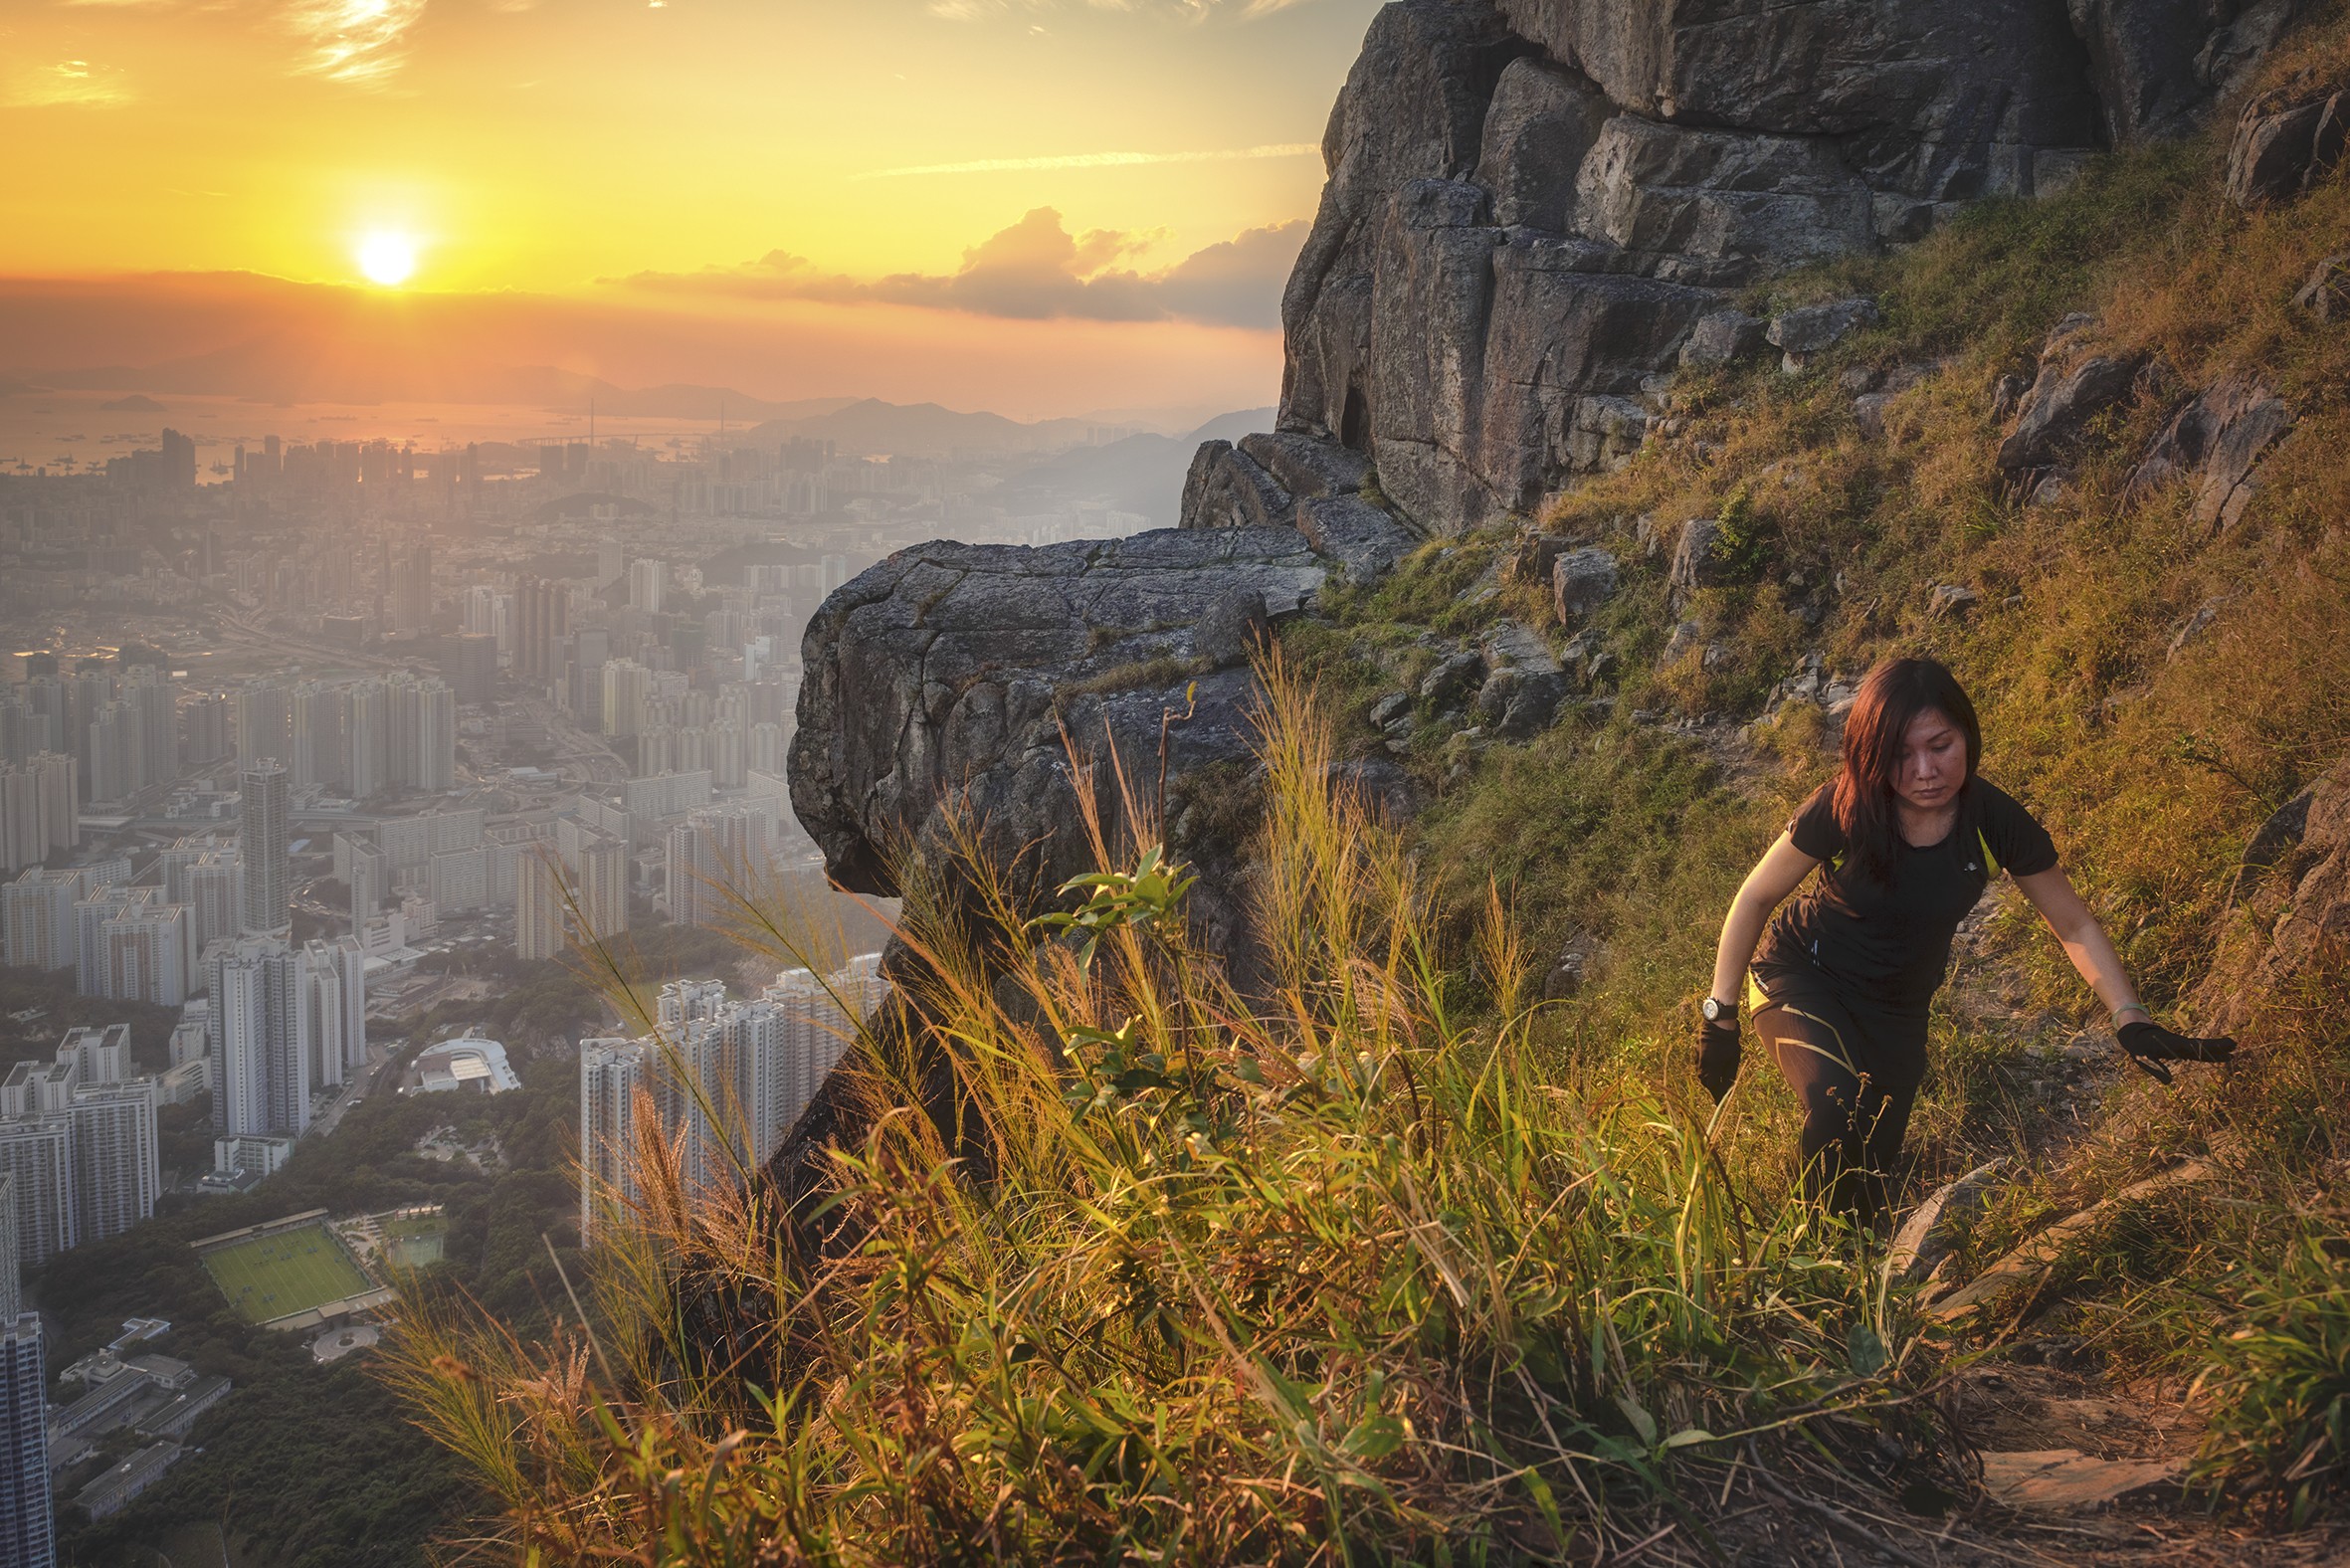 Kowloon Peak, the highest mountain on the Kowloon Peninsula, is an advanced-level hike as it involves climbers scrambling up narrow paths, but its popularity is growing thanks to social media coverage. Photo: Edward Tin